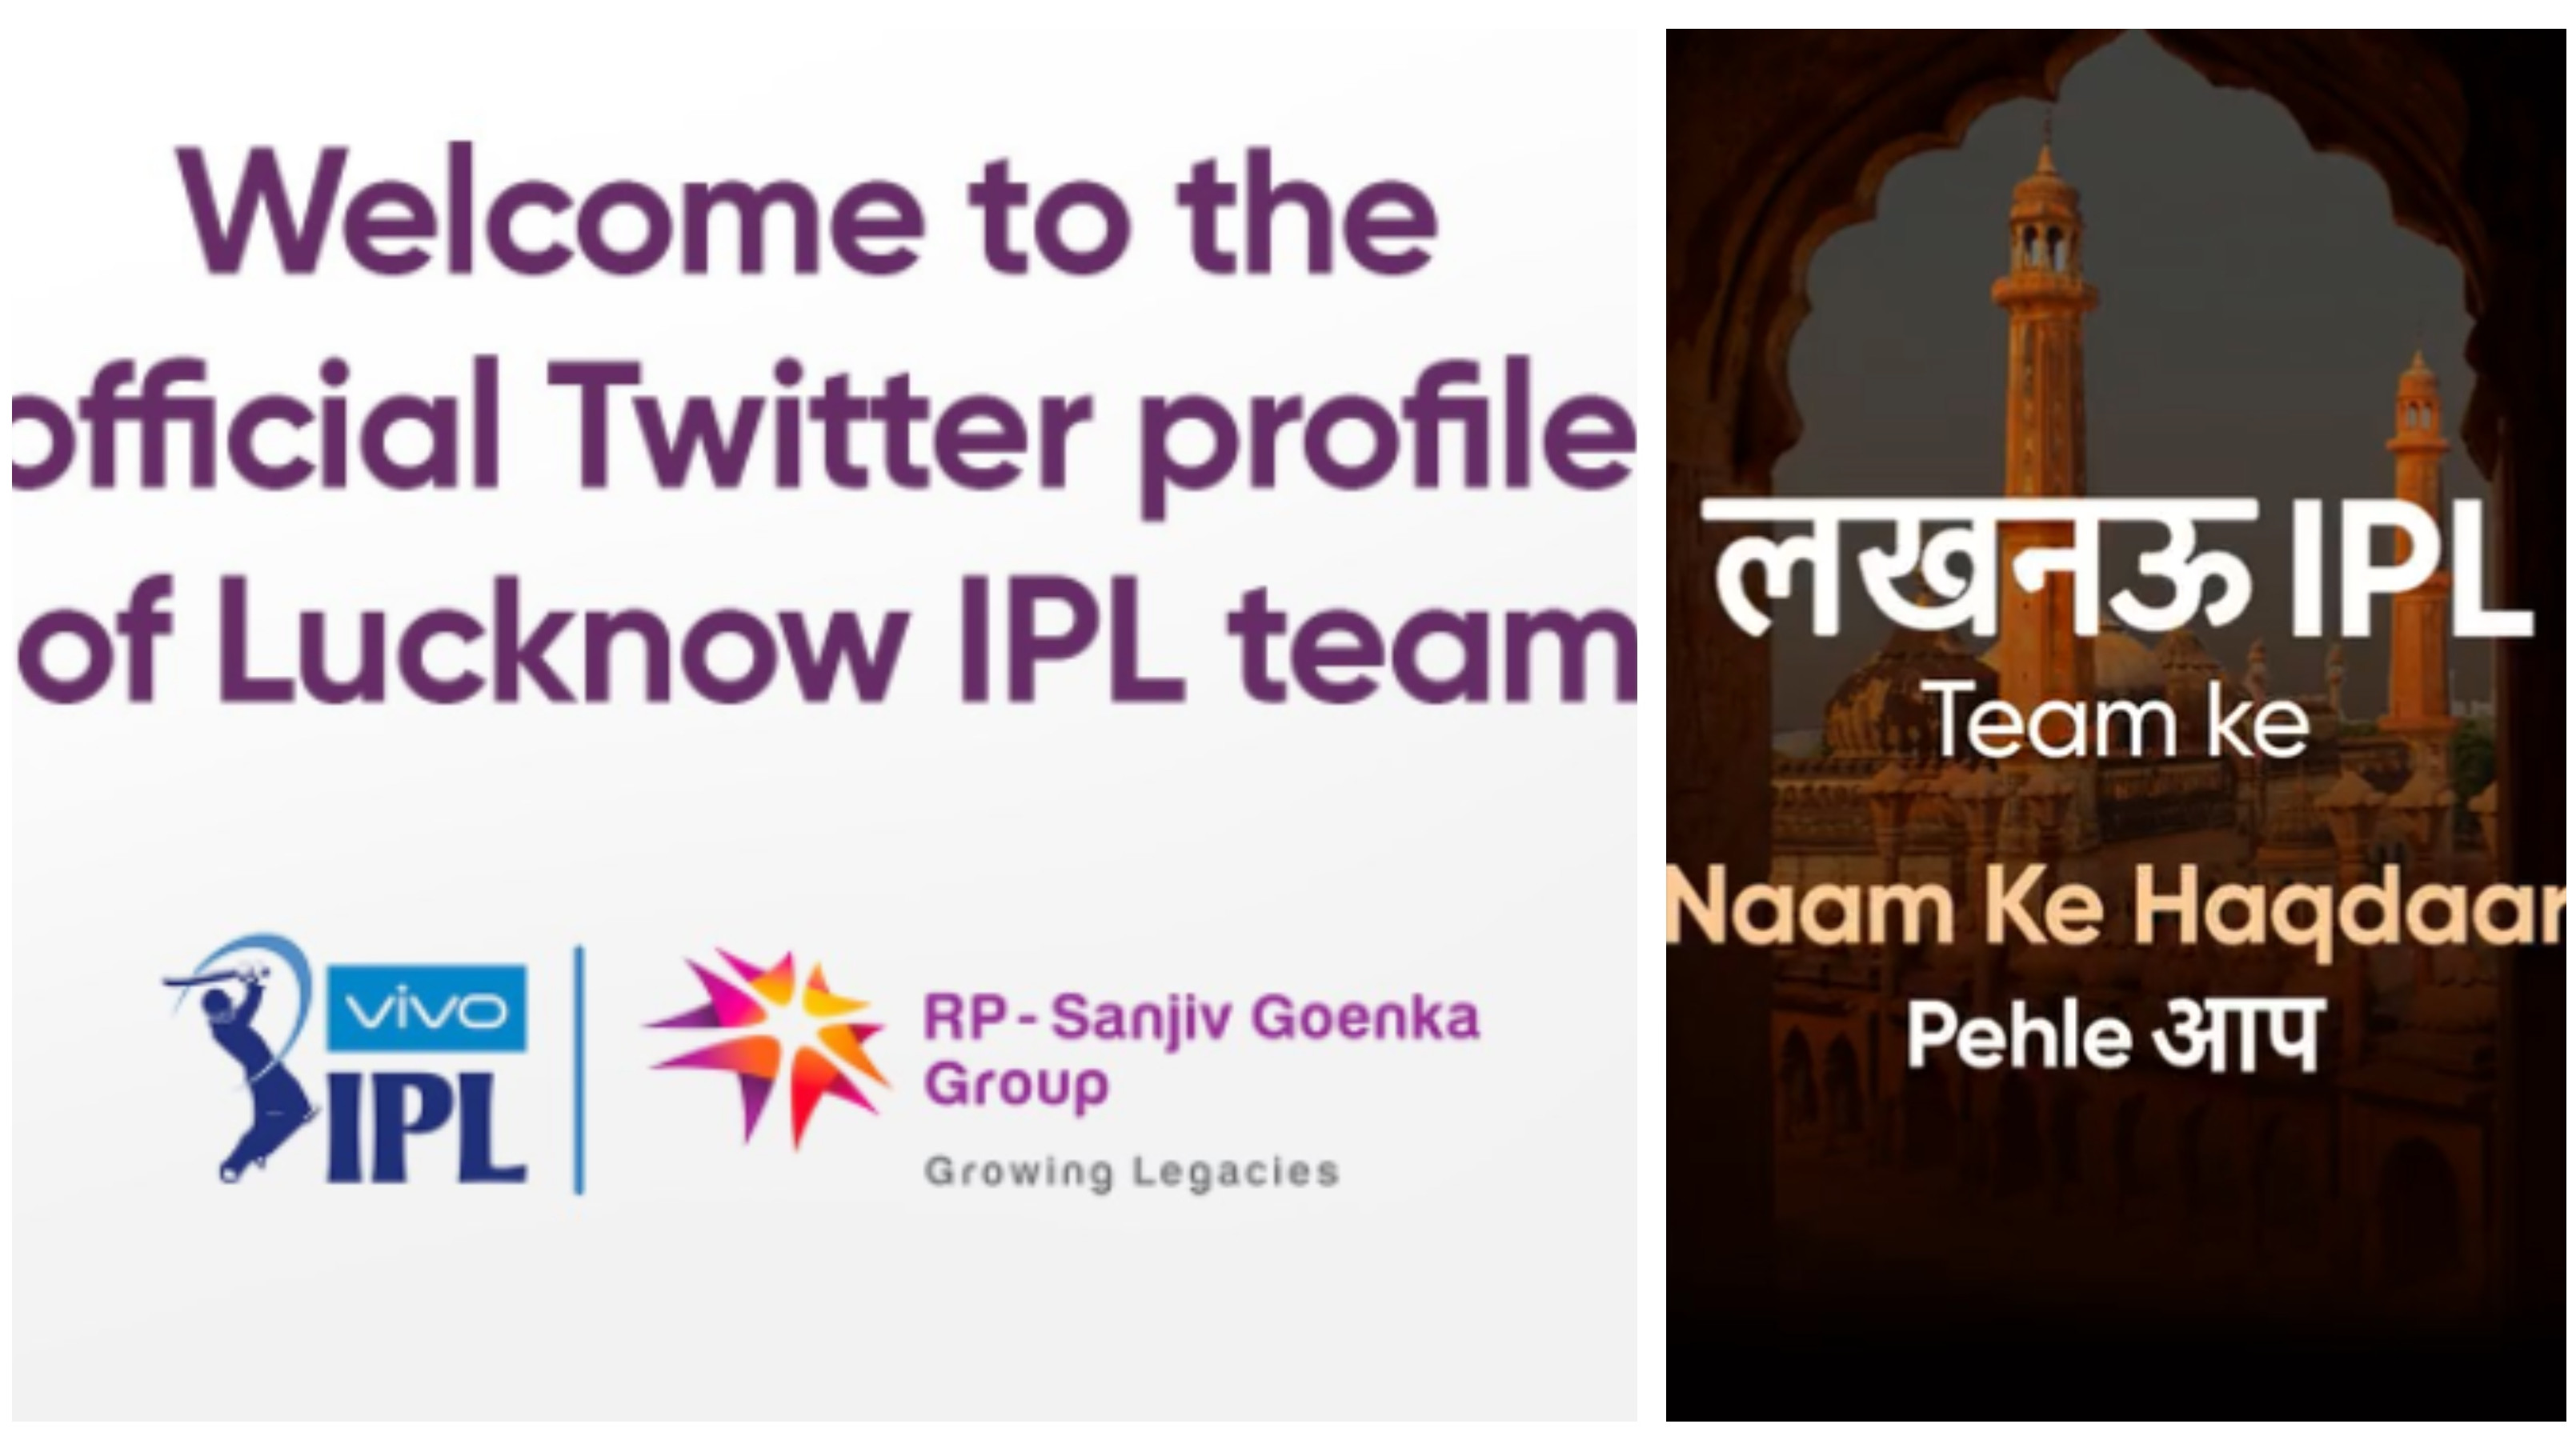 IPL 2022: Lucknow IPL team makes grand debut on Twitter, asks fans to suggest name for the franchise